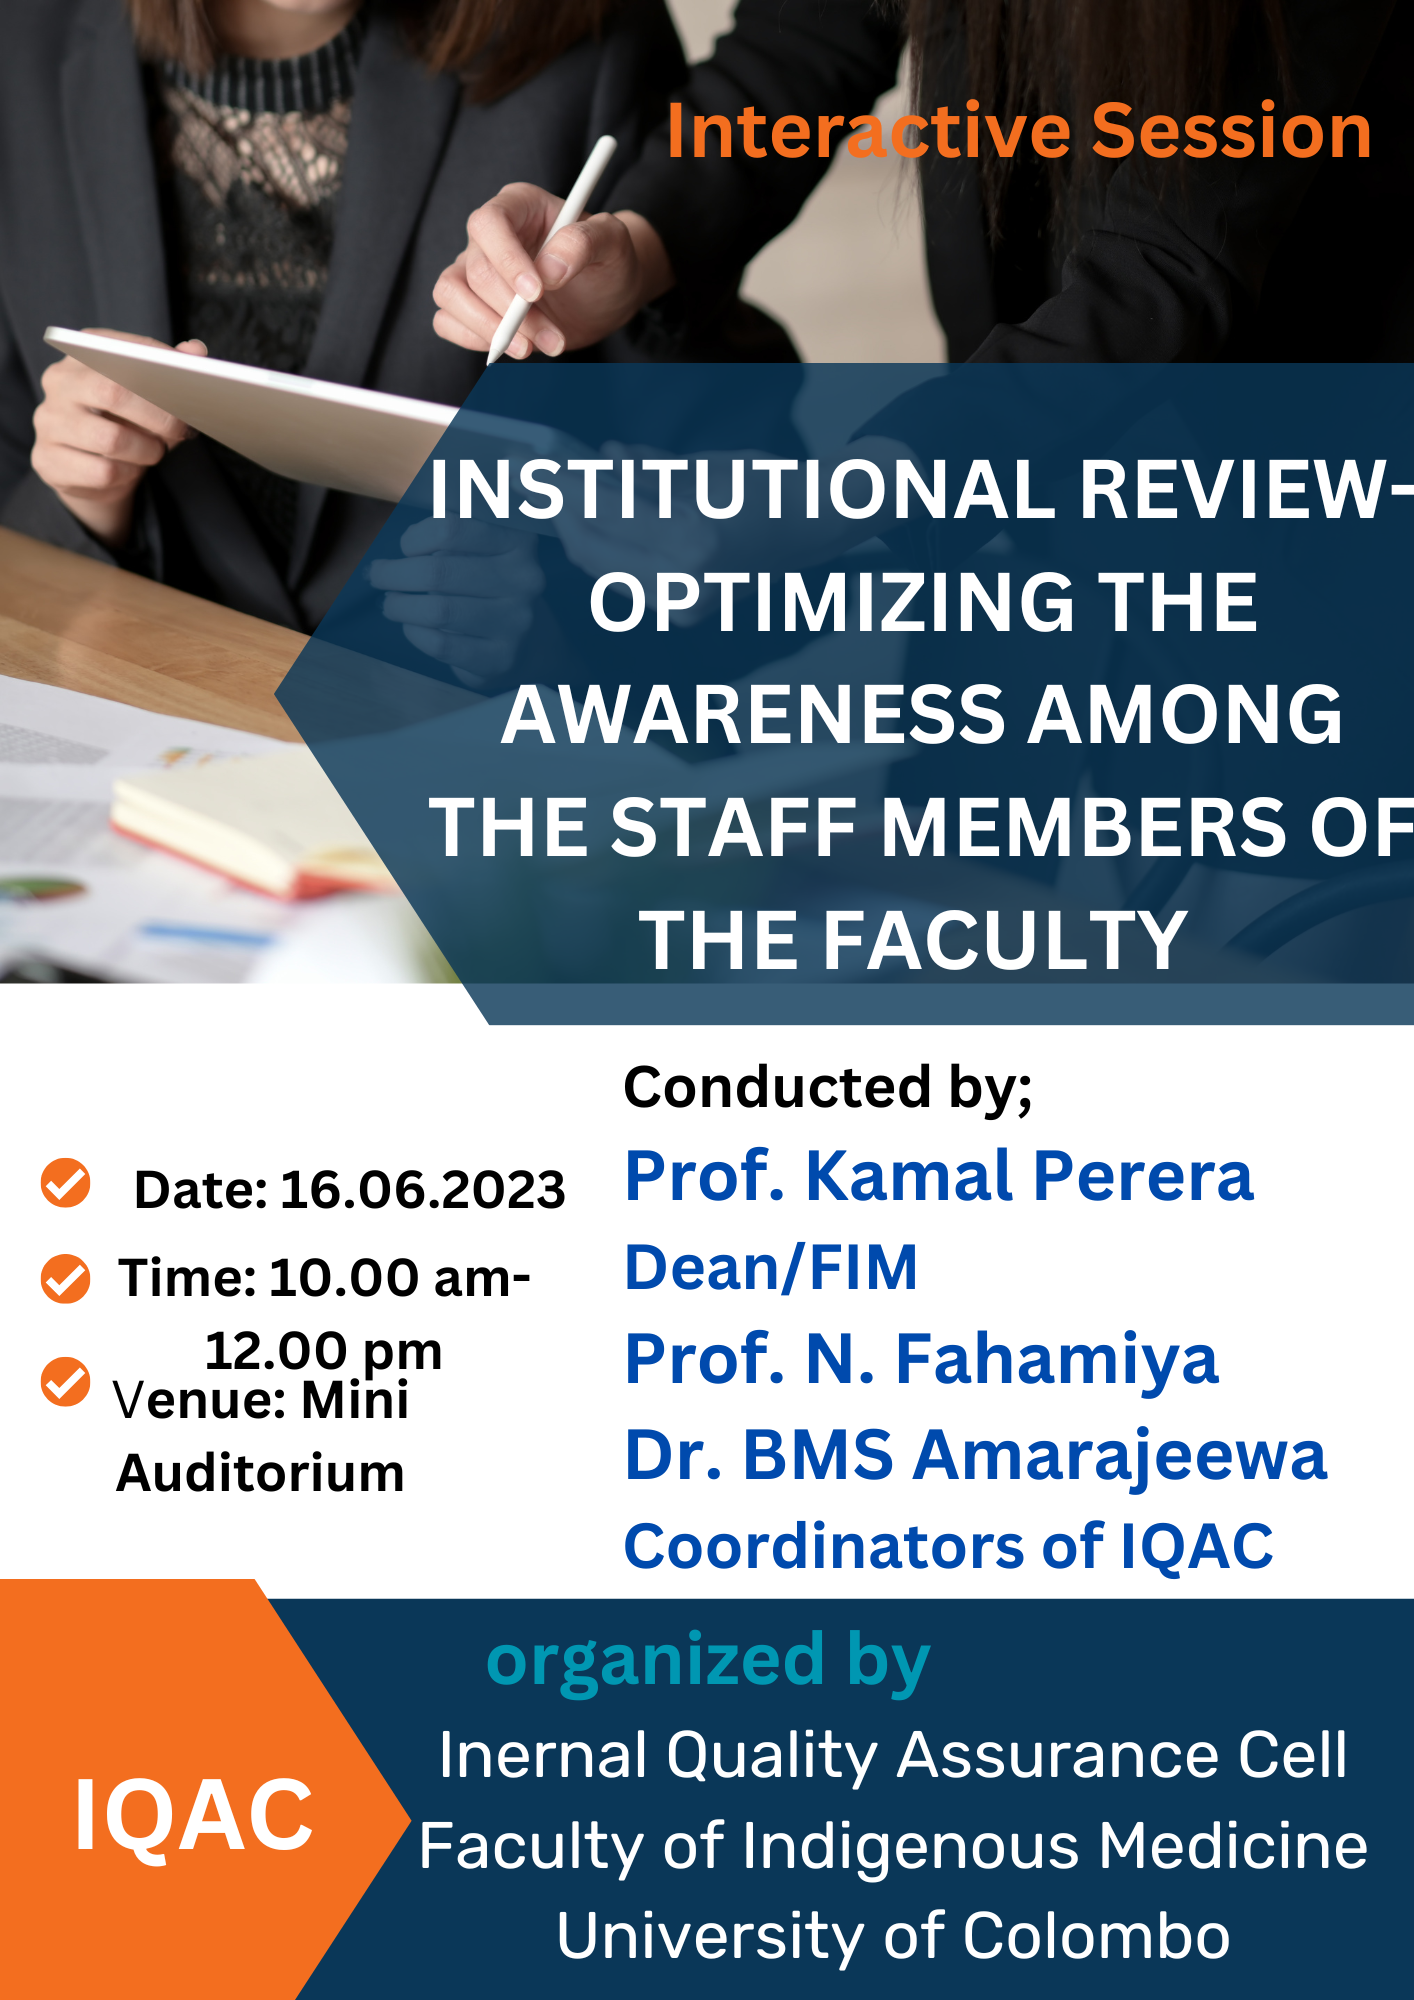 Workshop on Institutional Review